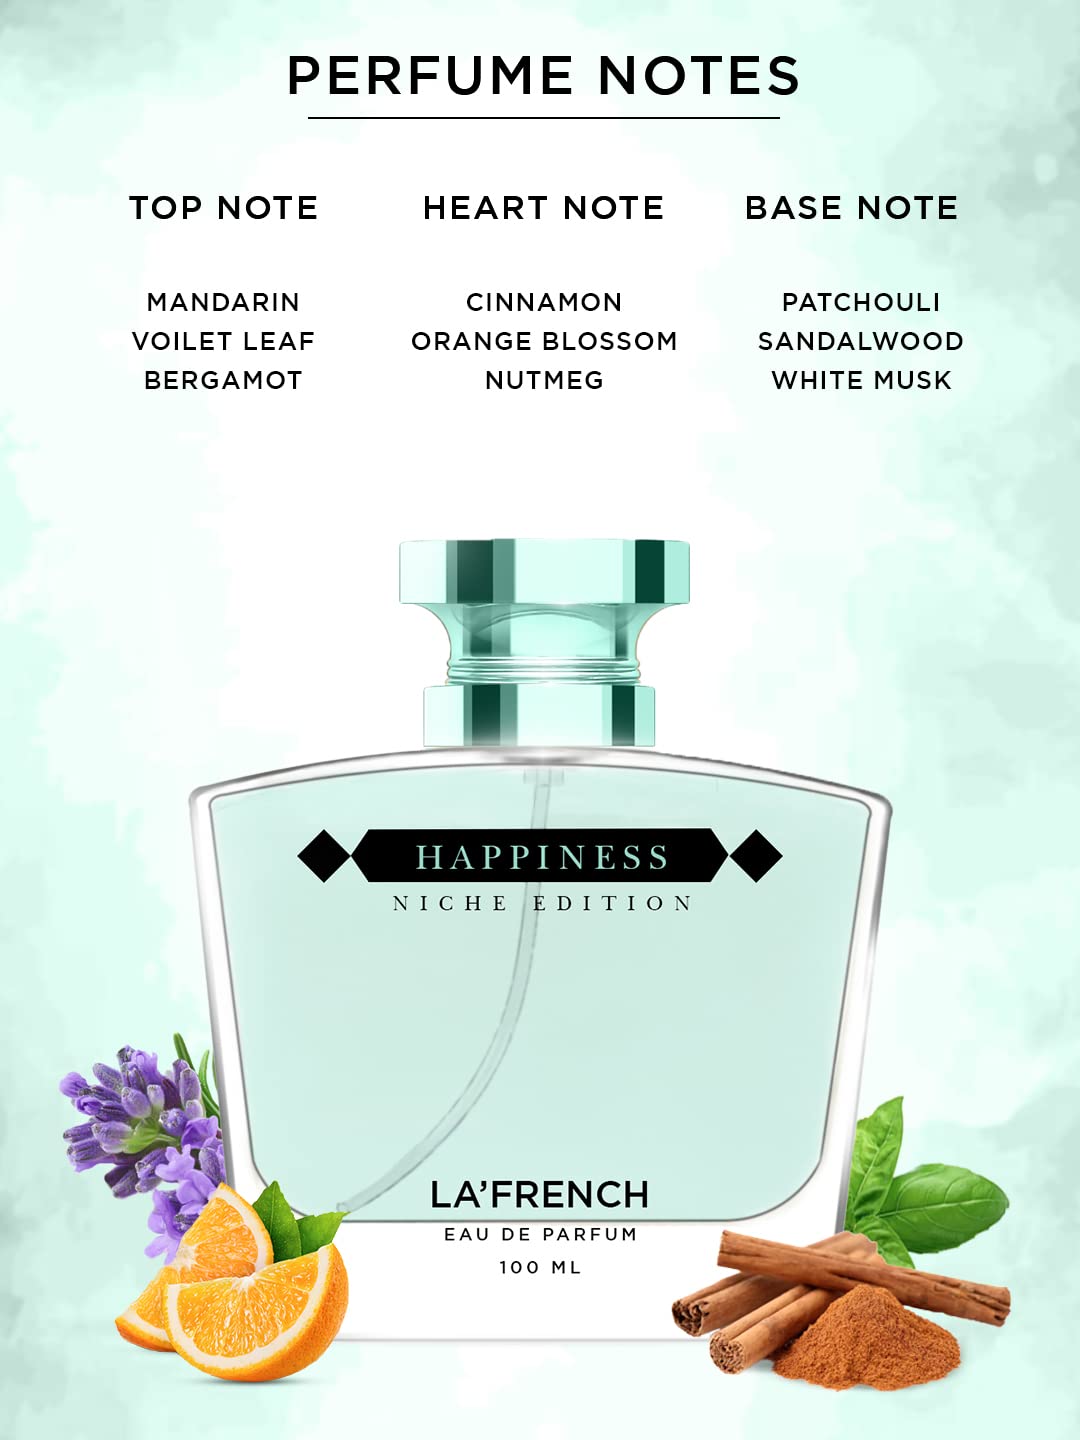 La French Happiness Perfume for Men - 100ml | Luxury Gift | Extra Long Lasting Smell | Premium French Fragrance Scent | Eau De Parfum